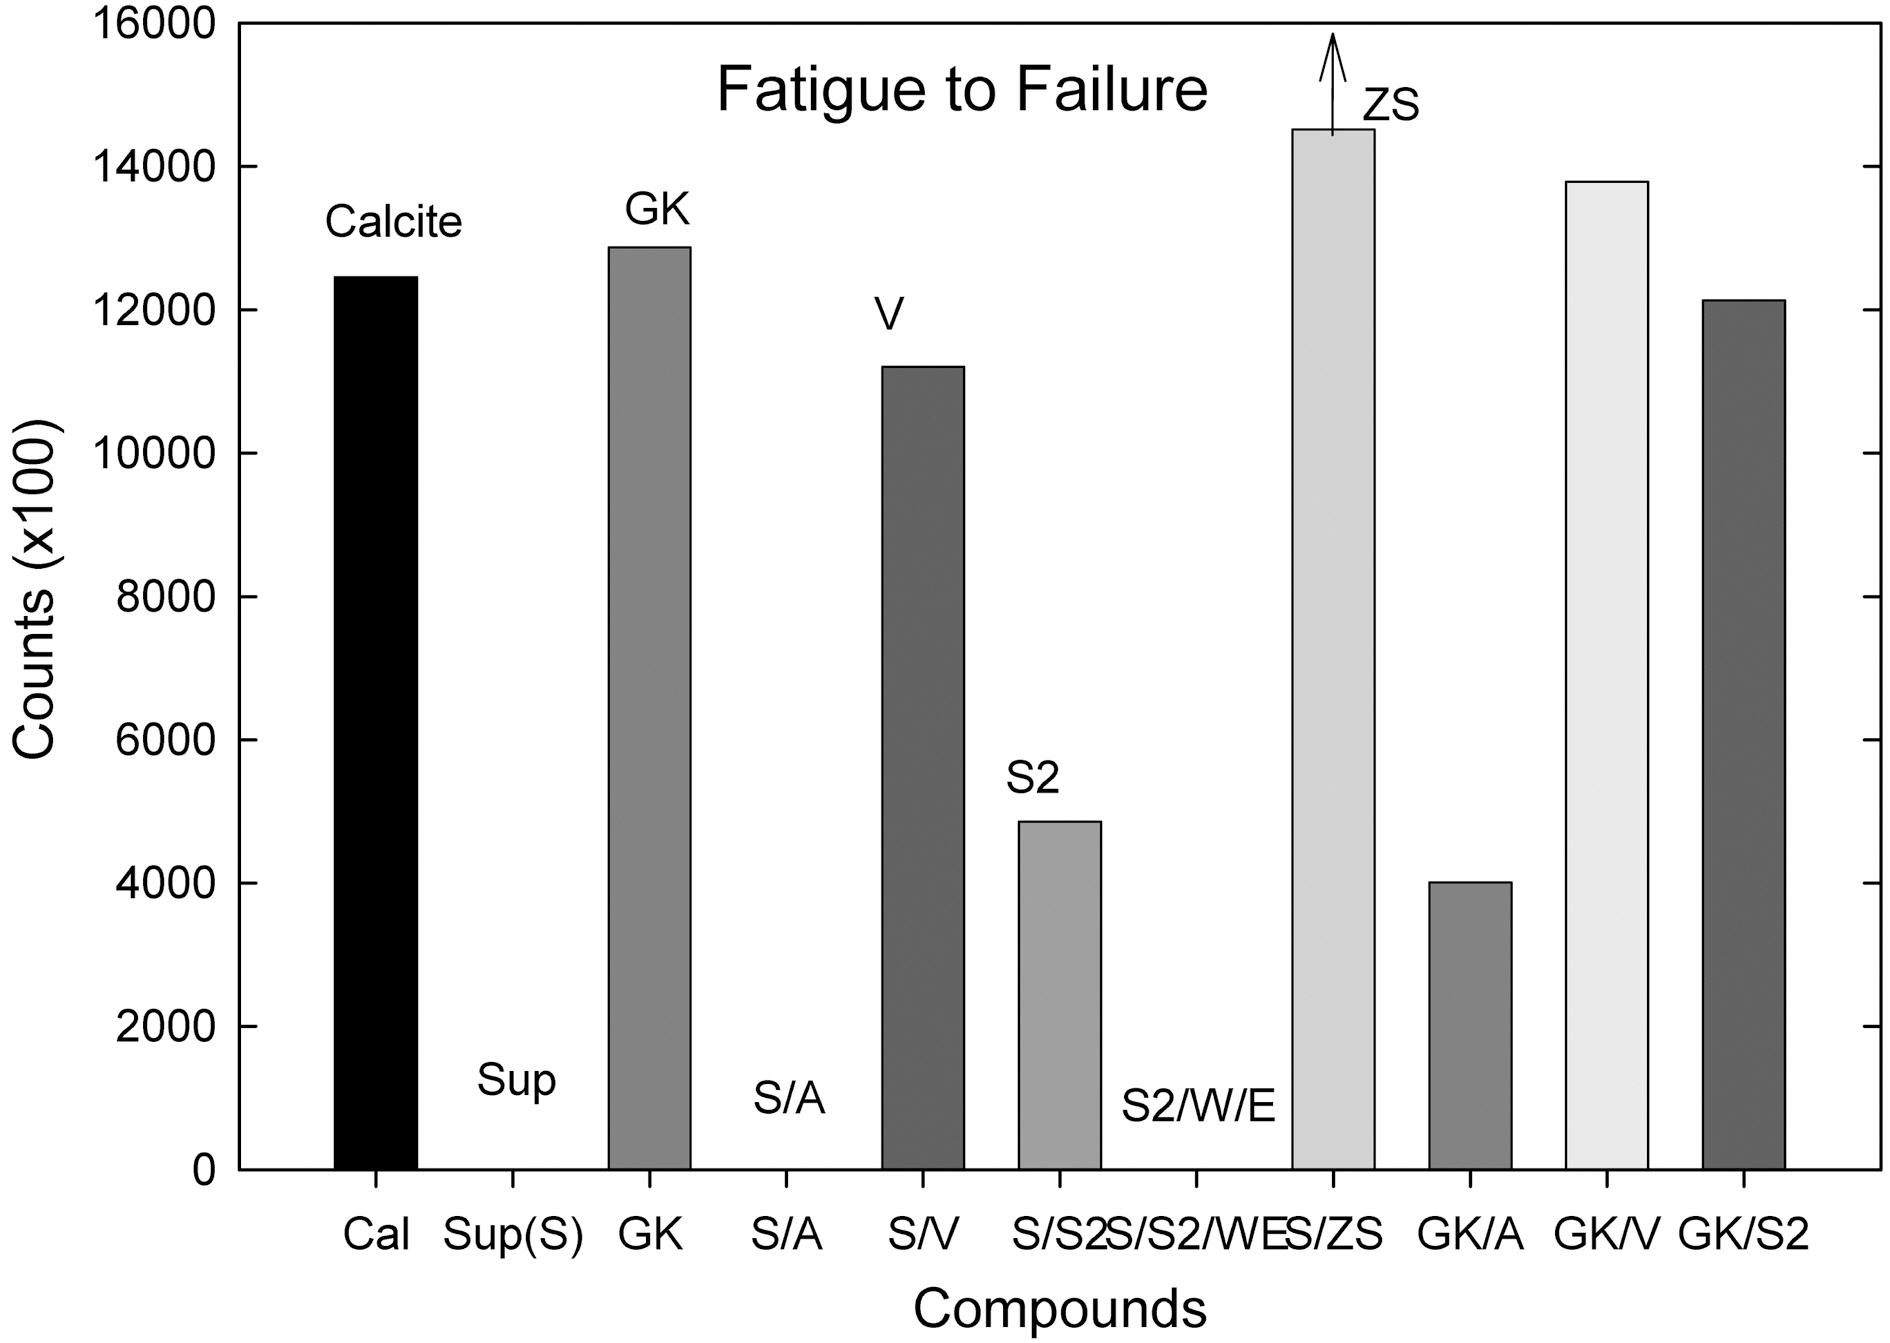 Fatigue to failure counts of each compound.